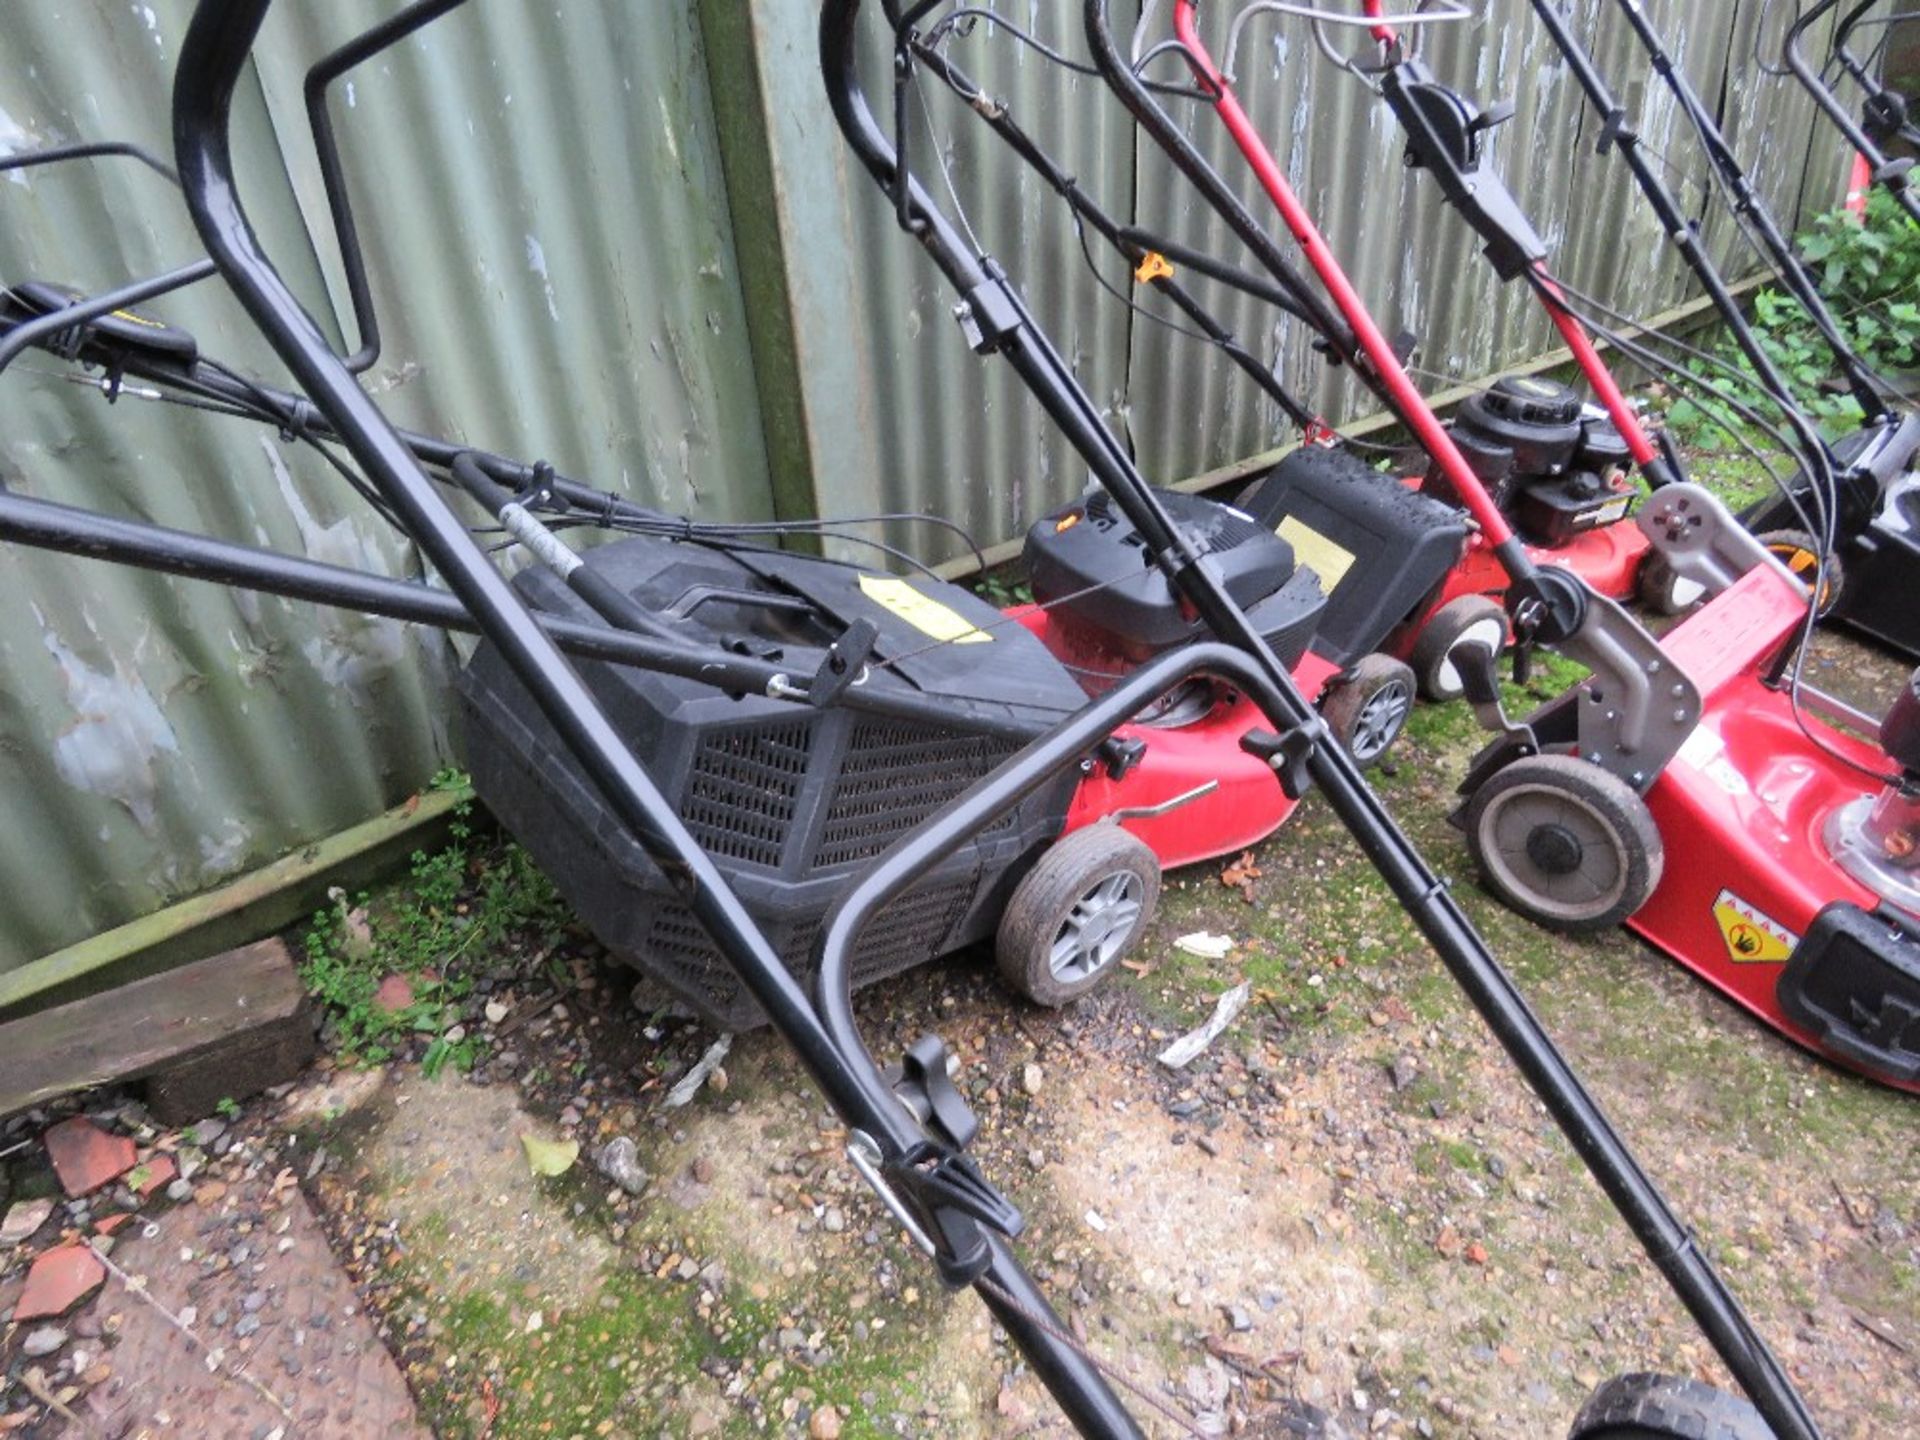 MOUNTFIELD PUSH PETROL ENGINED LAWN MOWER, WITH BOX. THIS LOT IS SOLD UNDER THE AUCTIONEERS MARG - Image 3 of 4